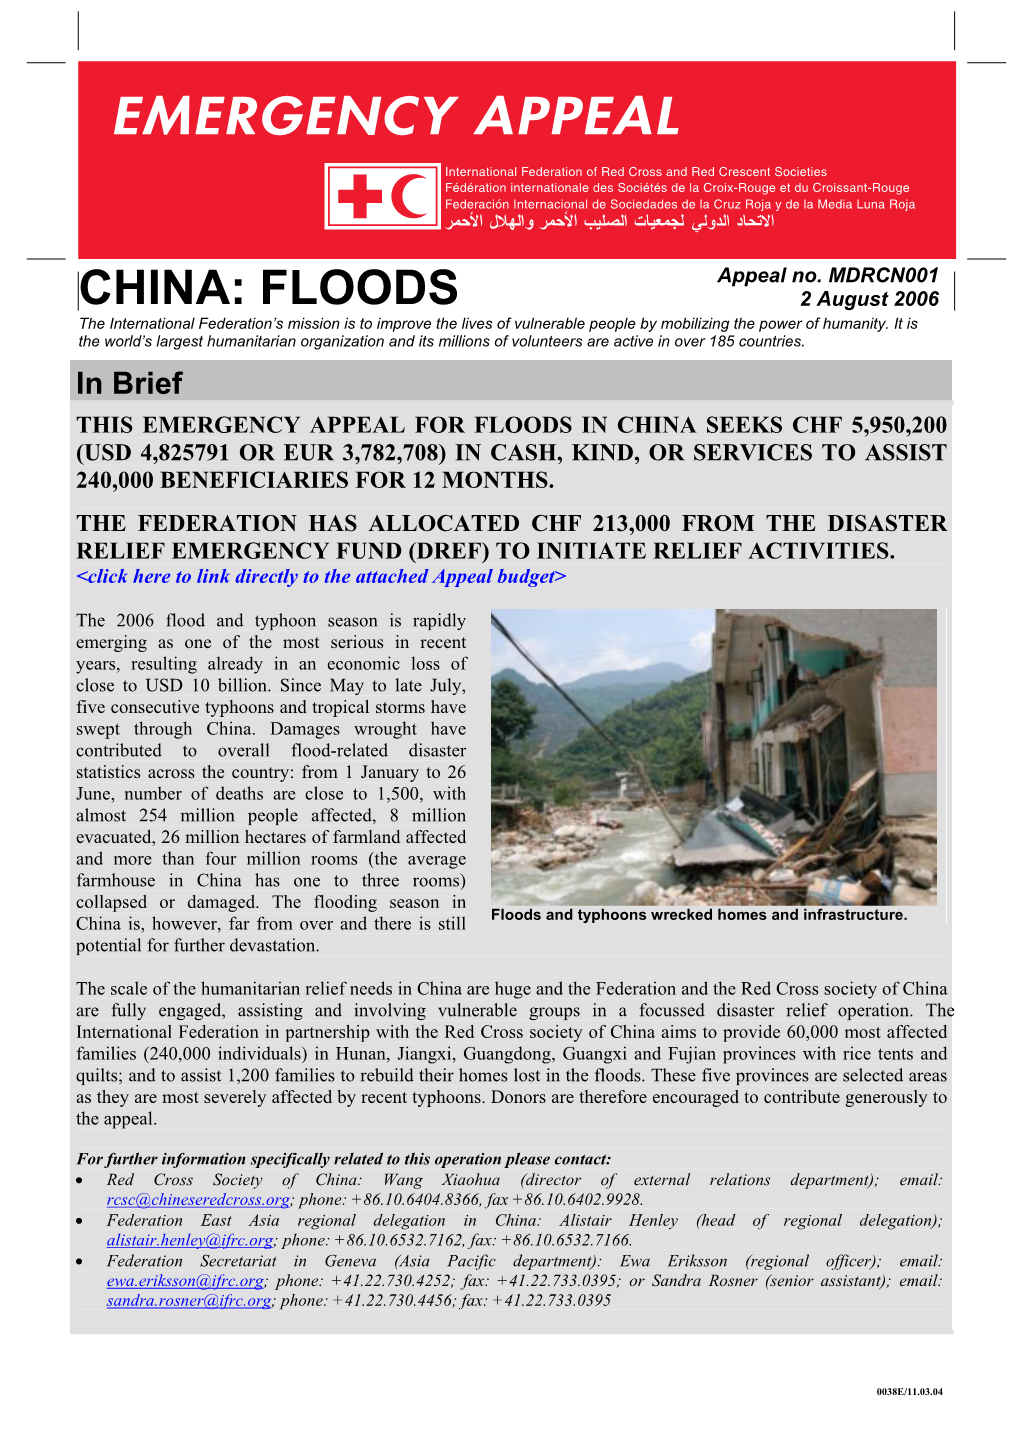 CHINA: FLOODS 2 August 2006 the International Federation’S Mission Is to Improve the Lives of Vulnerable People by Mobilizing the Power of Humanity